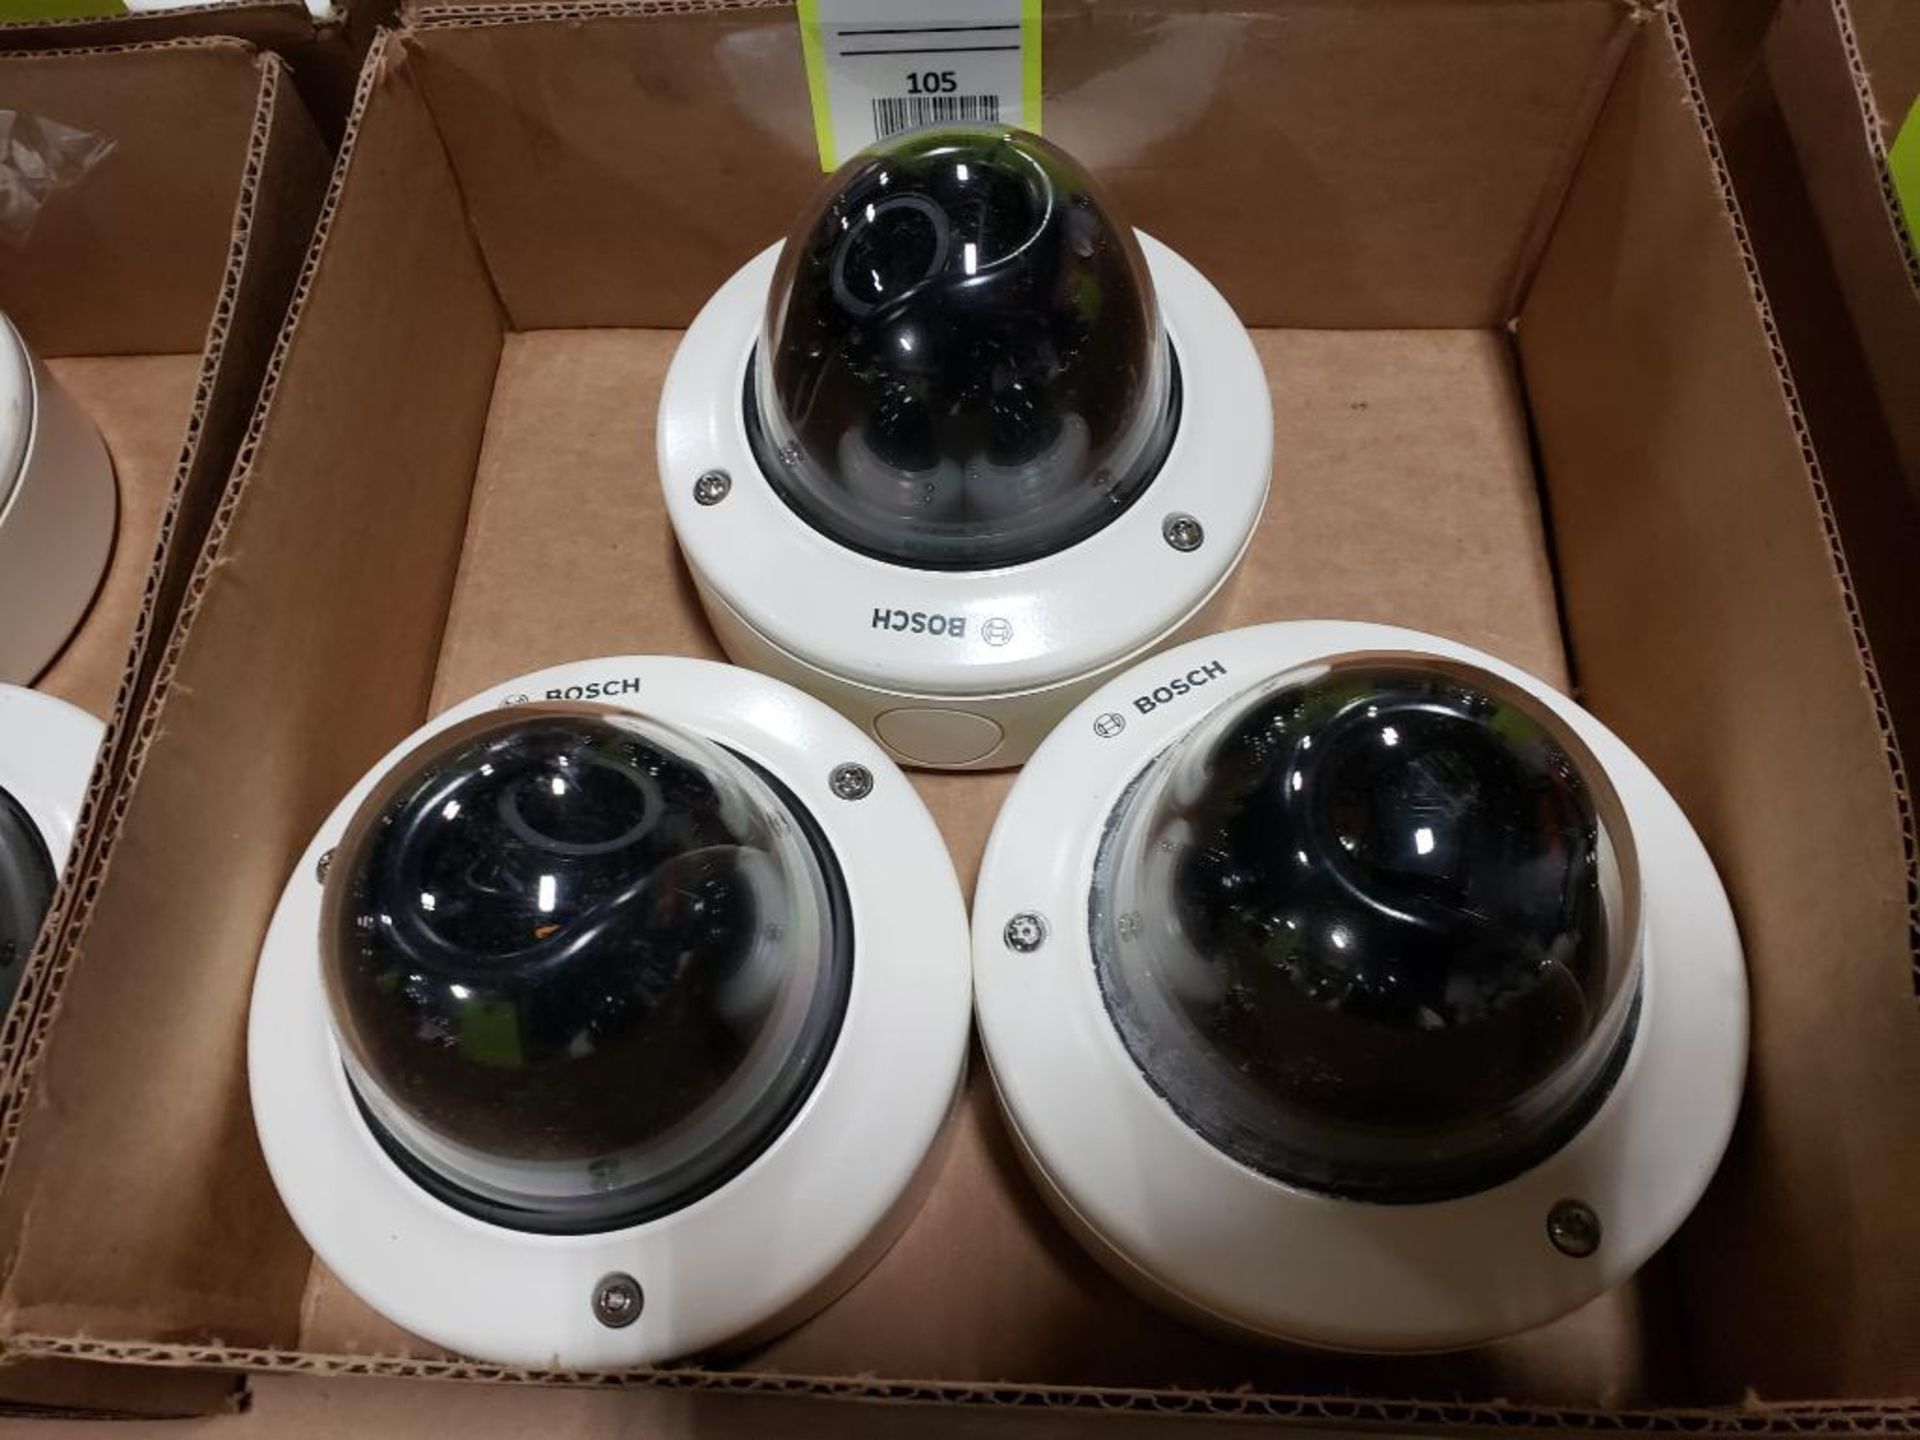 Lot of 3 Bosch Security CameraLot of 3 Bosch Security Camera. VDC-485V03-20 Cam Dome. - Image 3 of 3